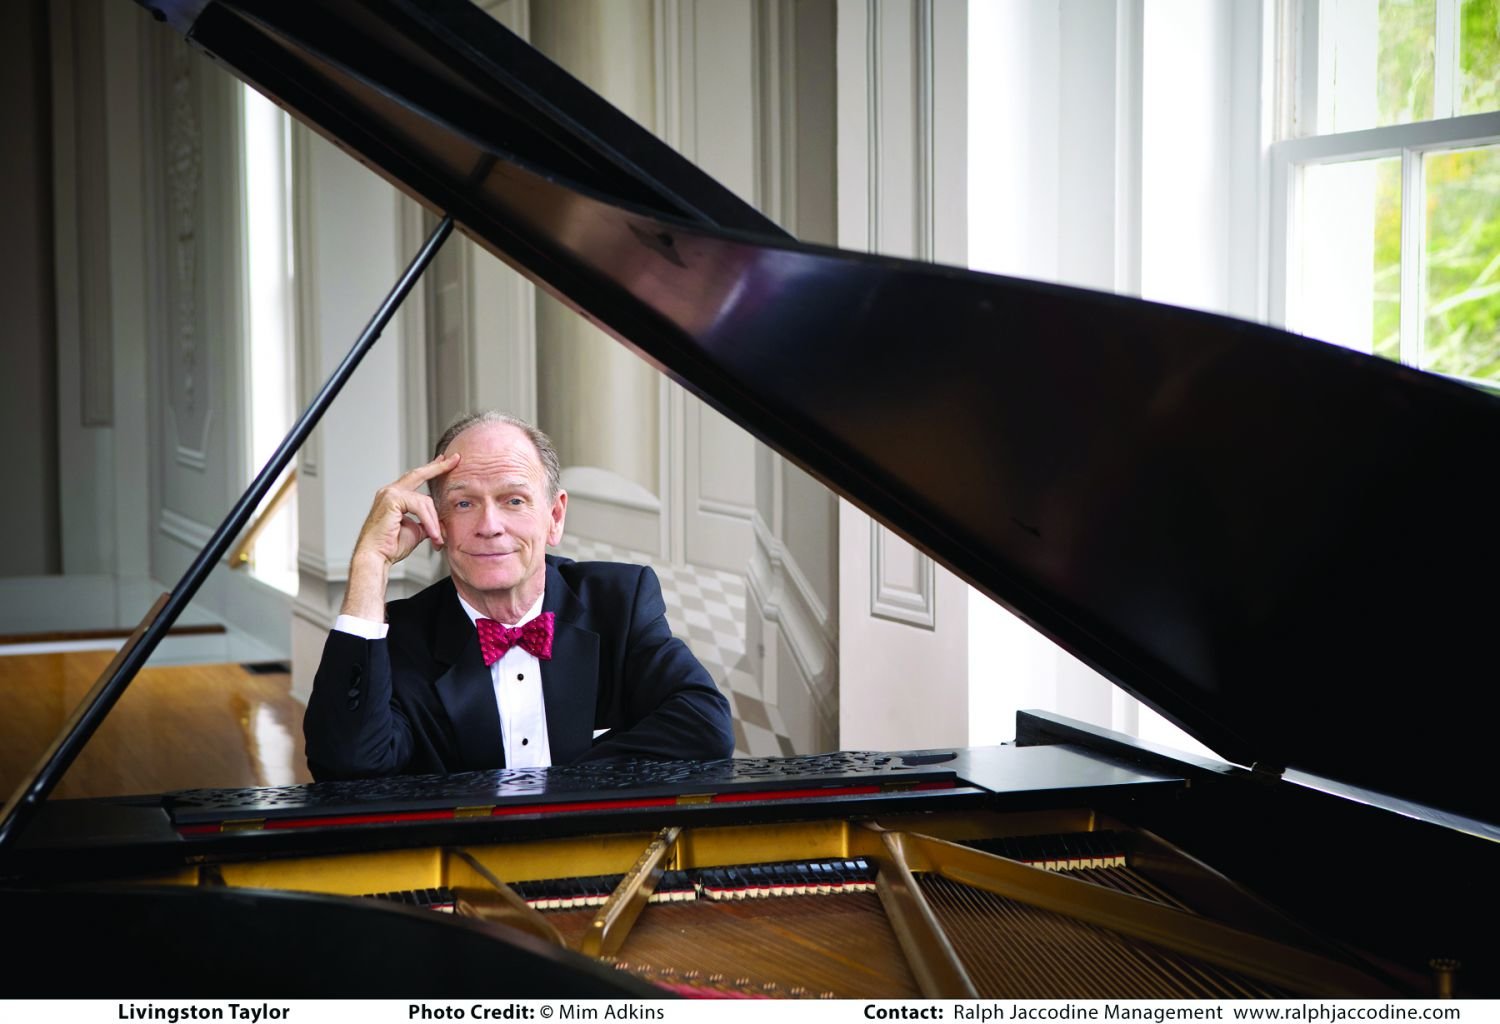 Livingston Taylor performs at Delaware Valley University April 14. Photograph by Mim Adkins .